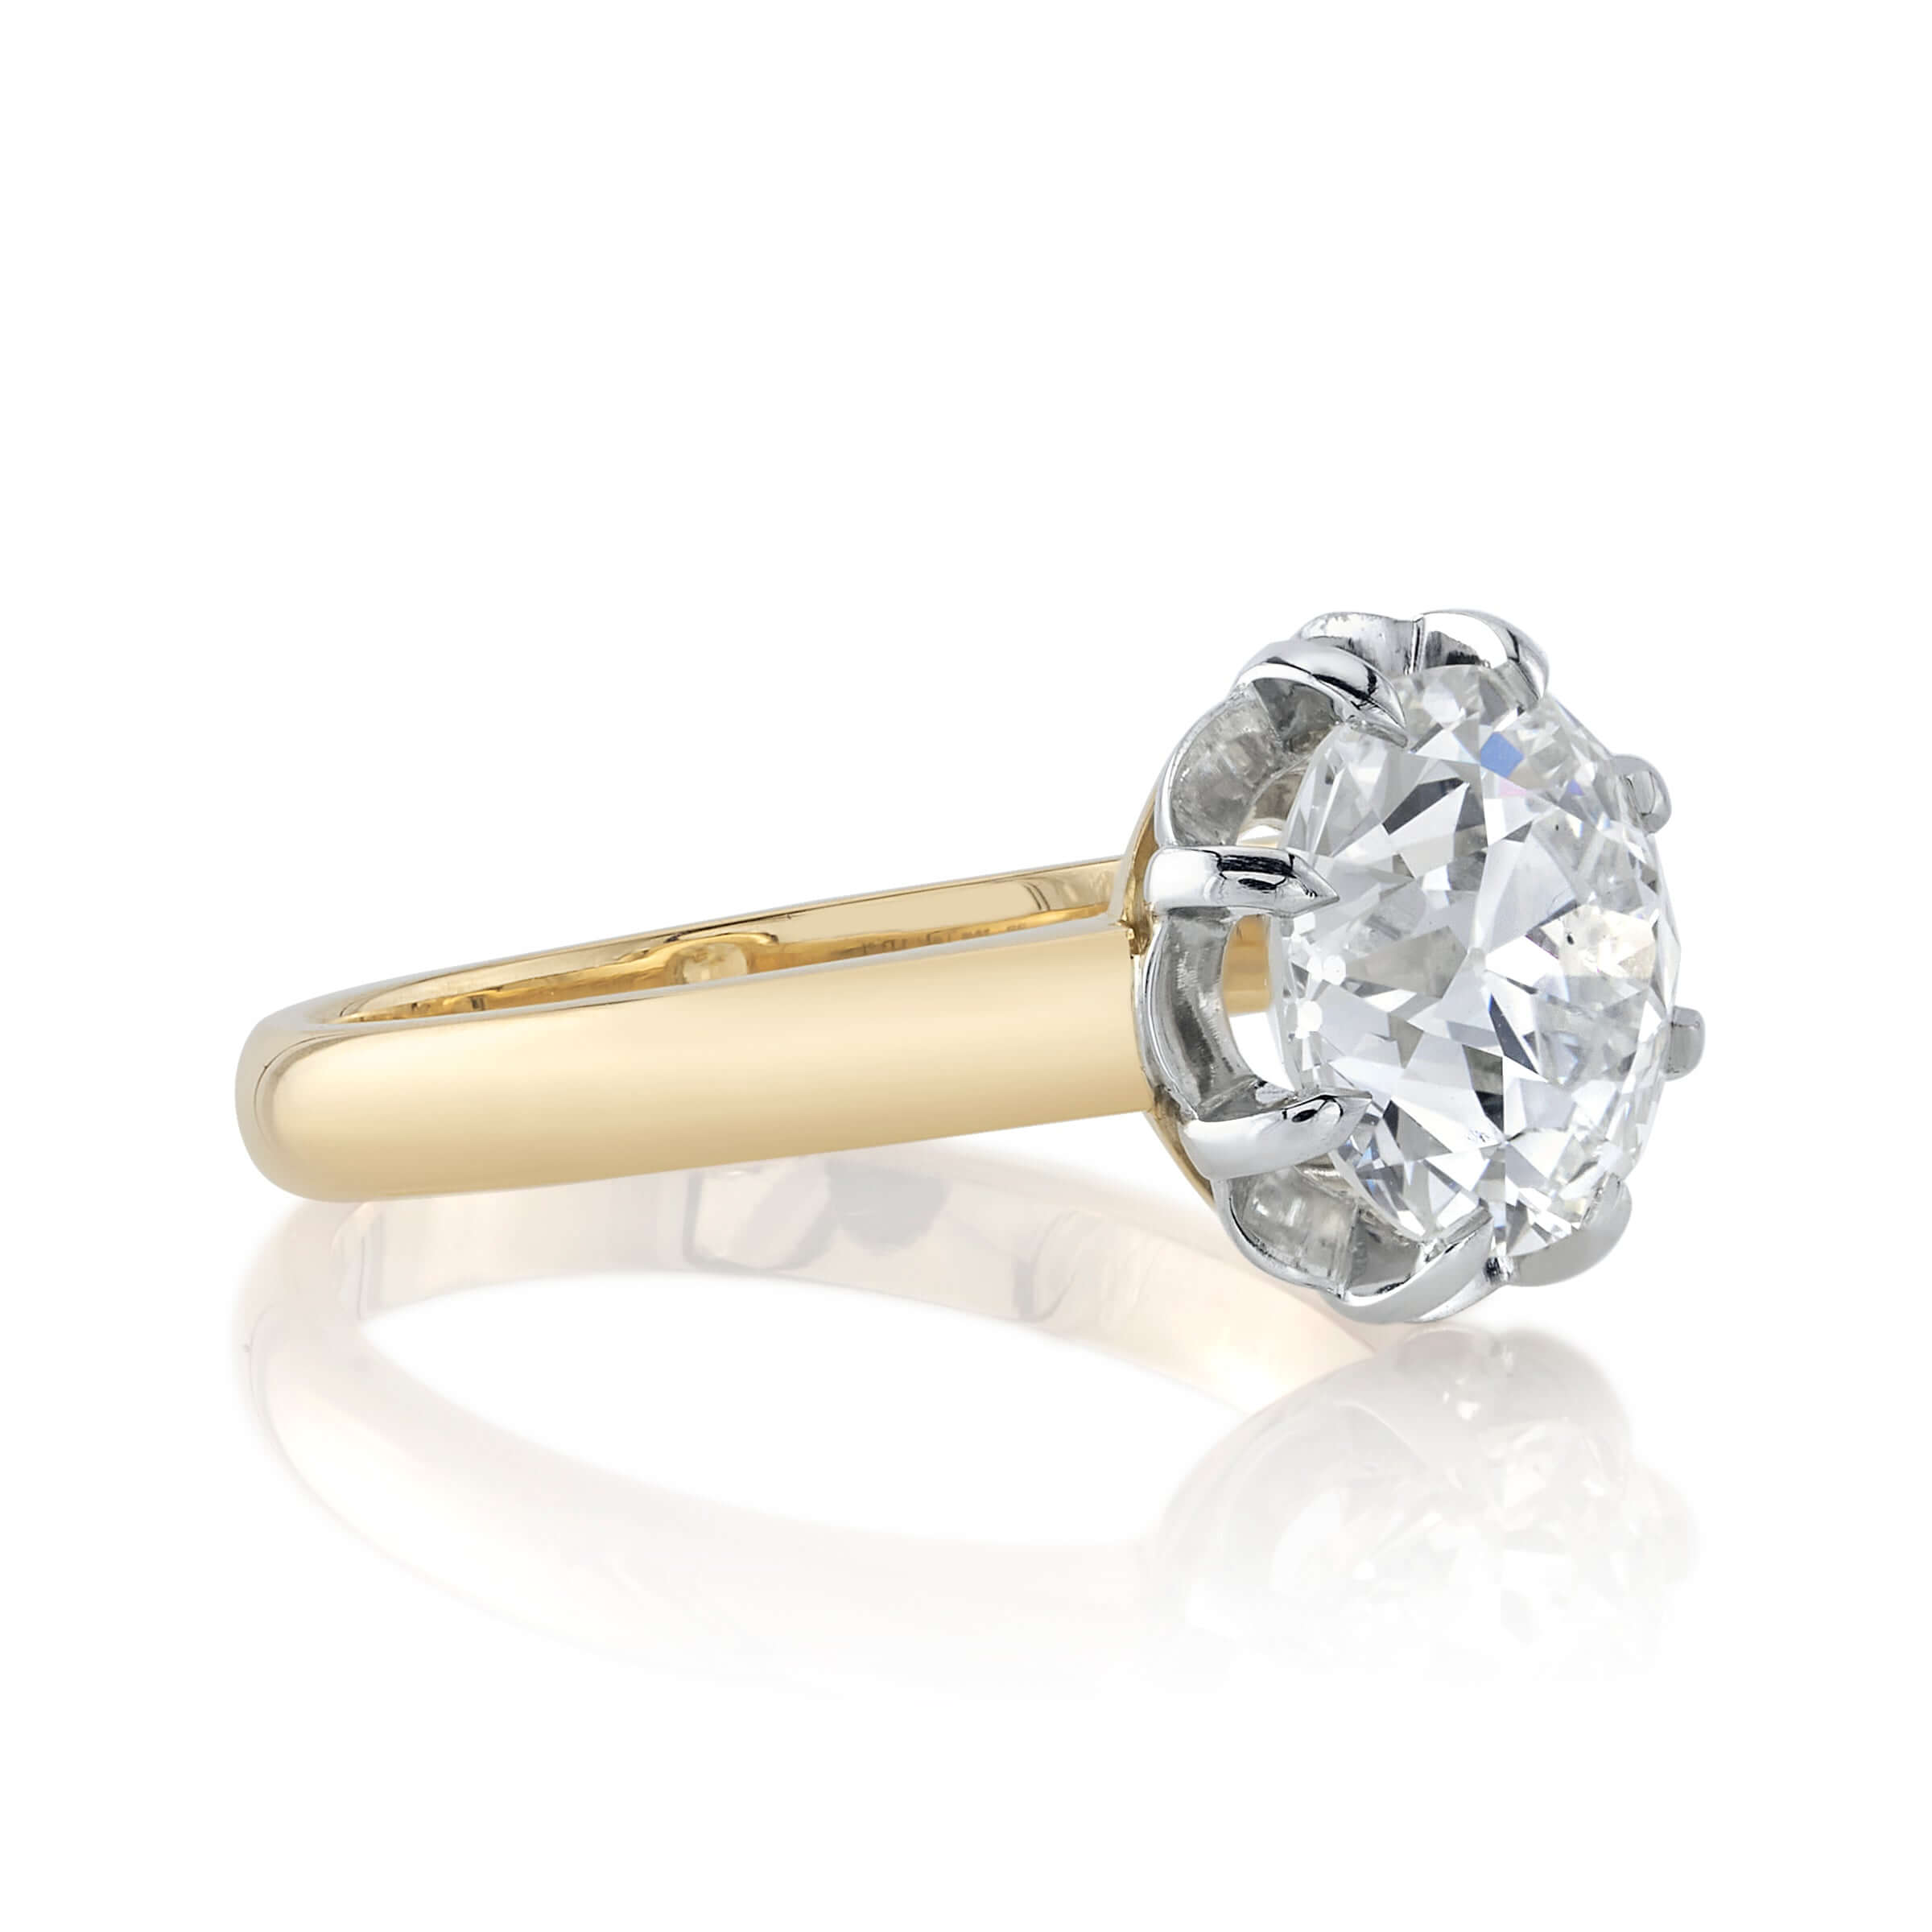 SINGLE STONE JOLENE RING featuring 2.63ct J/SI1 GIA certified old European cut diamond set in a handcrafted 18K yellow gold and platinum mounting.